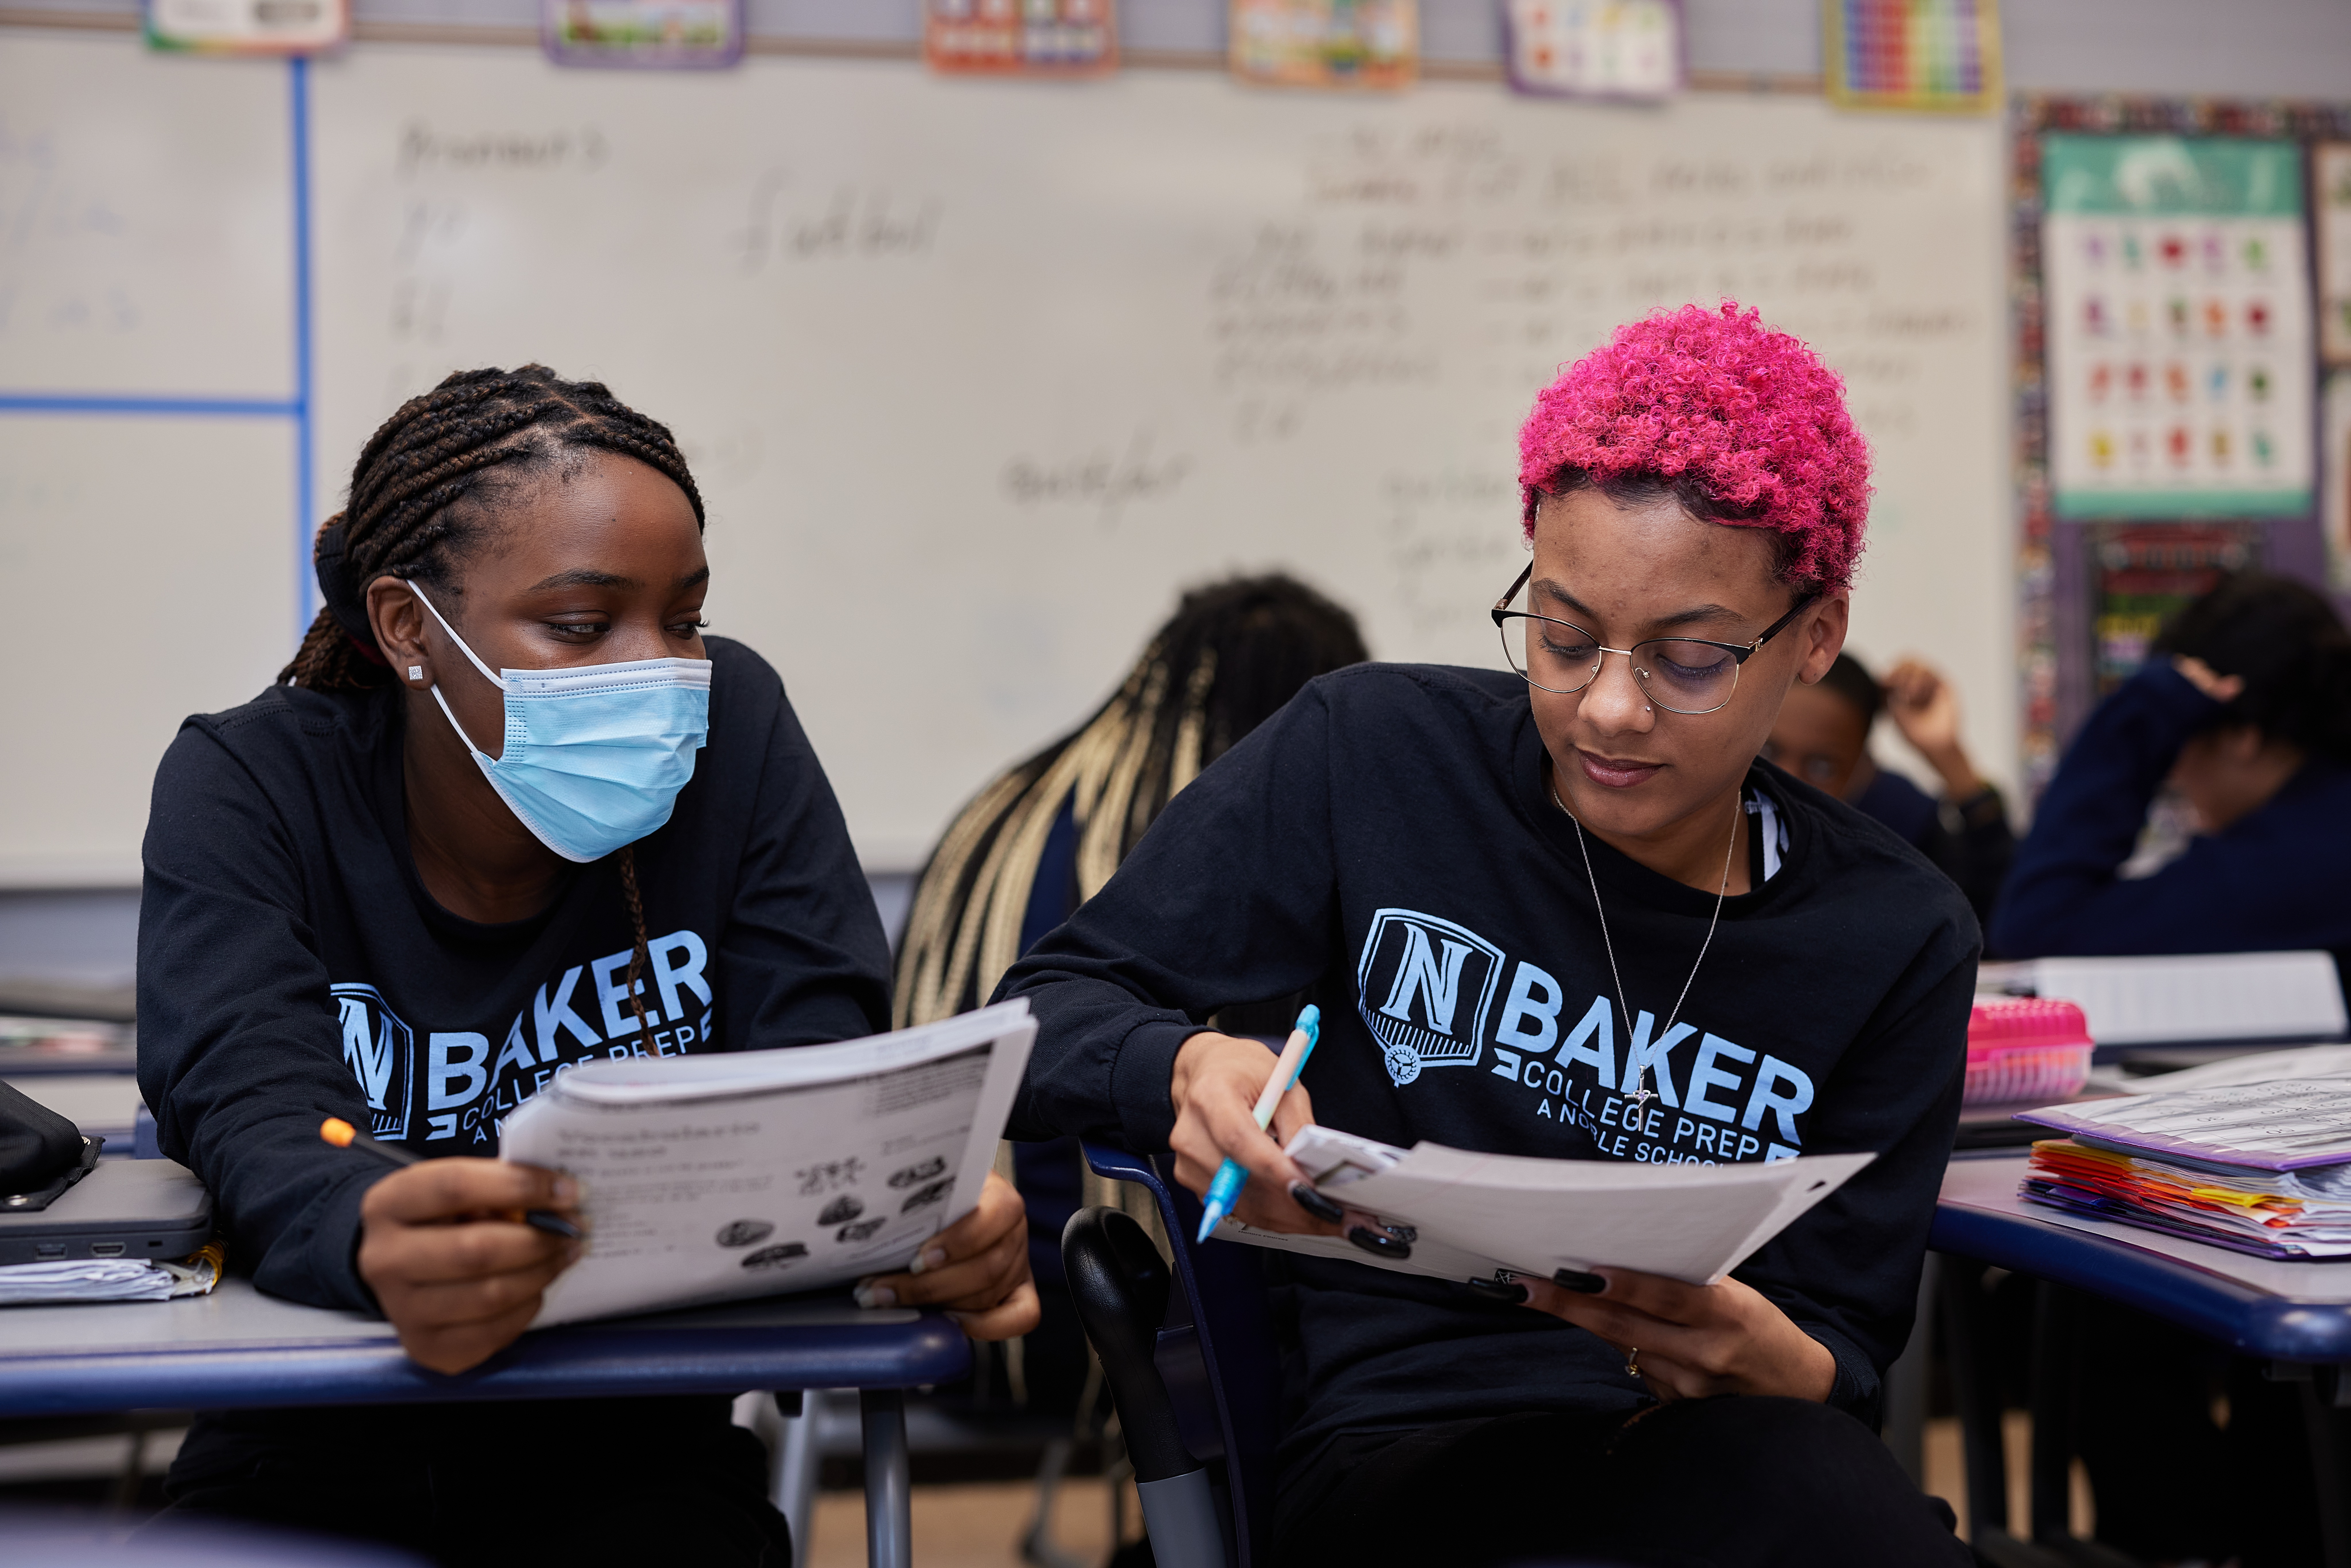 Photo shows two Baker College Prep students studying together in a classroom. They are holding and looking at activity packets in their hands. They are two young Black students, one with bright pink short hair and the other with long black braids. They both wear matching Baker College Prep sweatshirts.